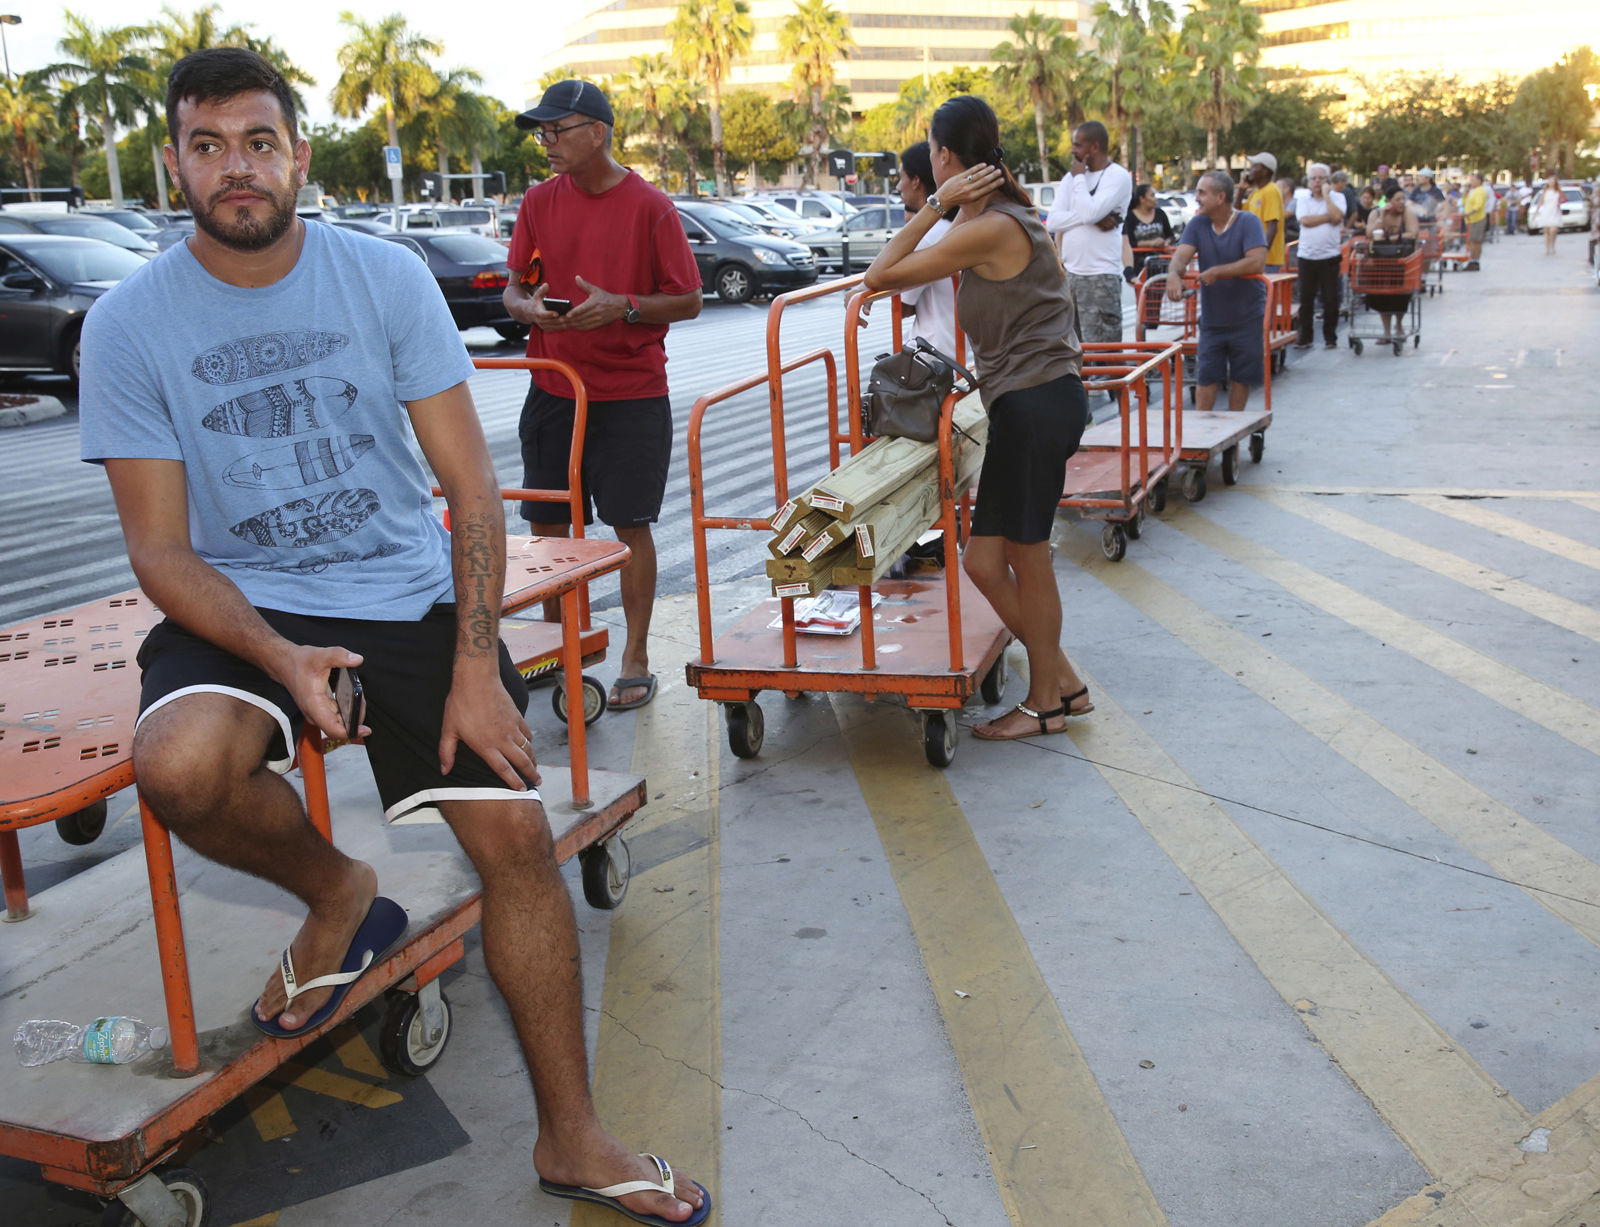 Max Garcia, of Miami, waits in a line since dawn to purchase plywood sheets at The Home Depot store in North Miami, Fla., Wednesday, Sept. 6, 2017. Florida residents are preparing for the possible landfall of Hurricane Irma, the most powerful Atlantic Ocean hurricane in recorded history. (AP Photo/Marta Lavandier)